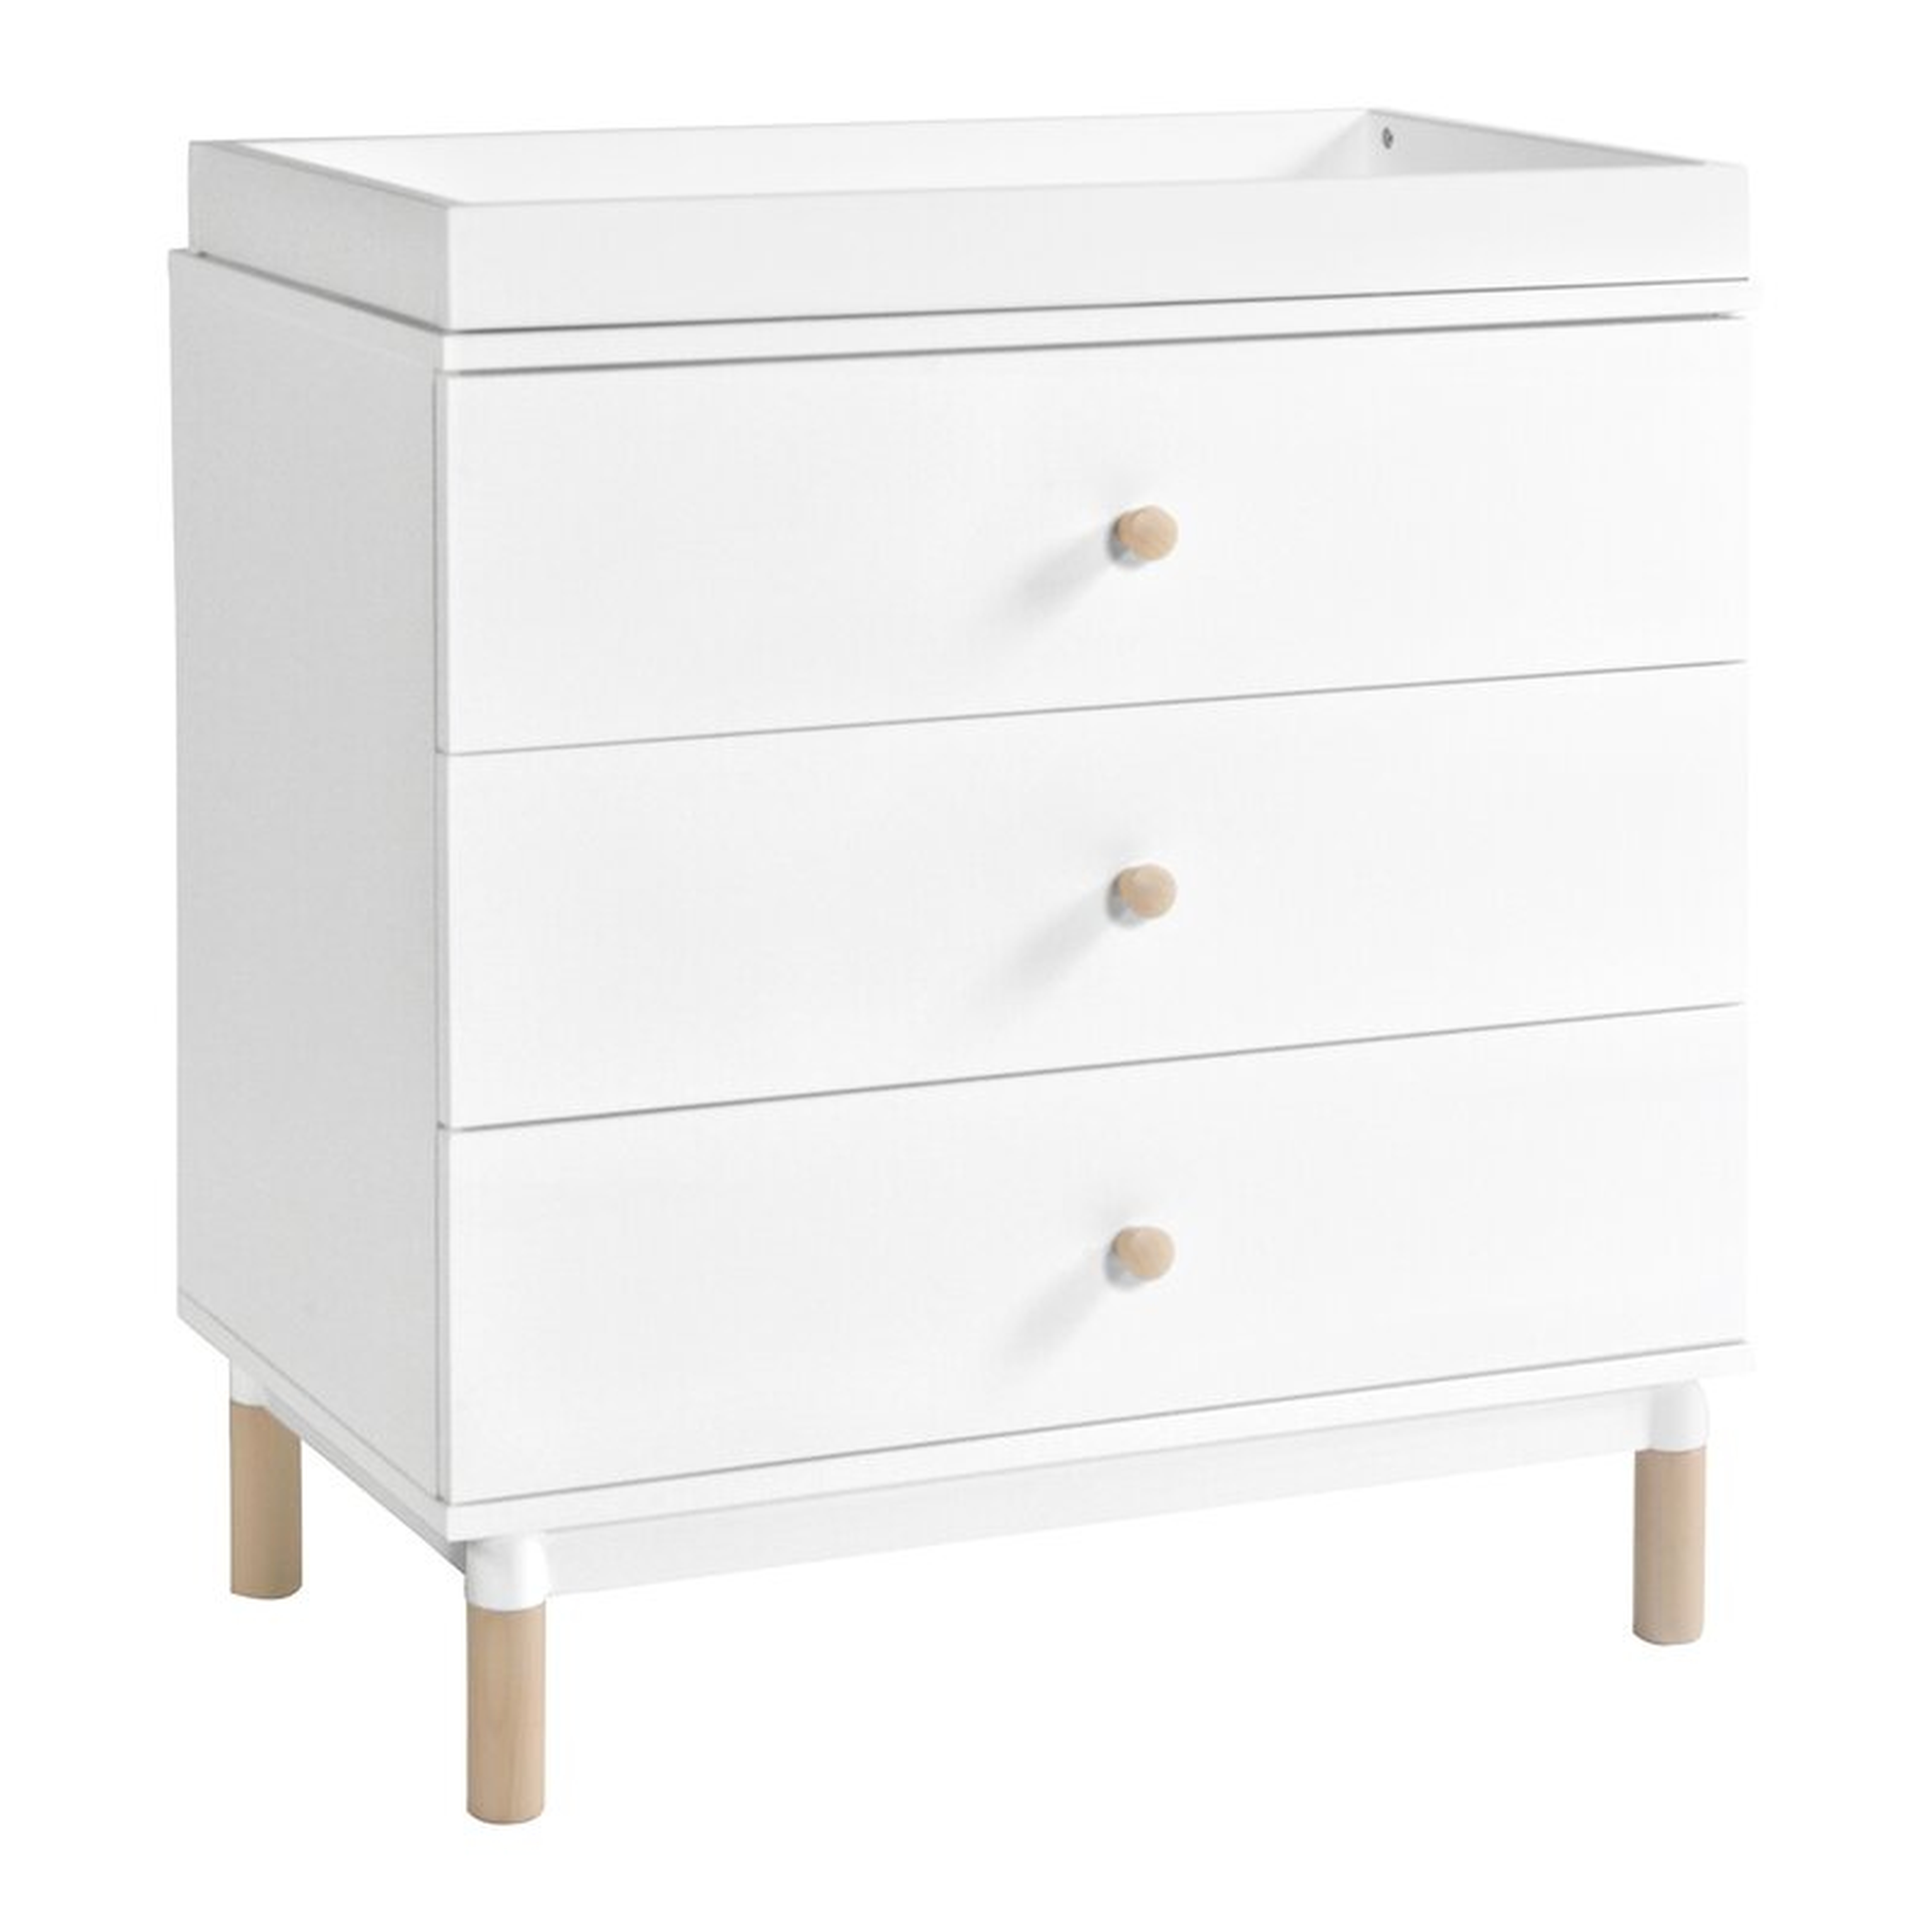 babyletto Gelato Changing Table Dresser Color: White - Perigold